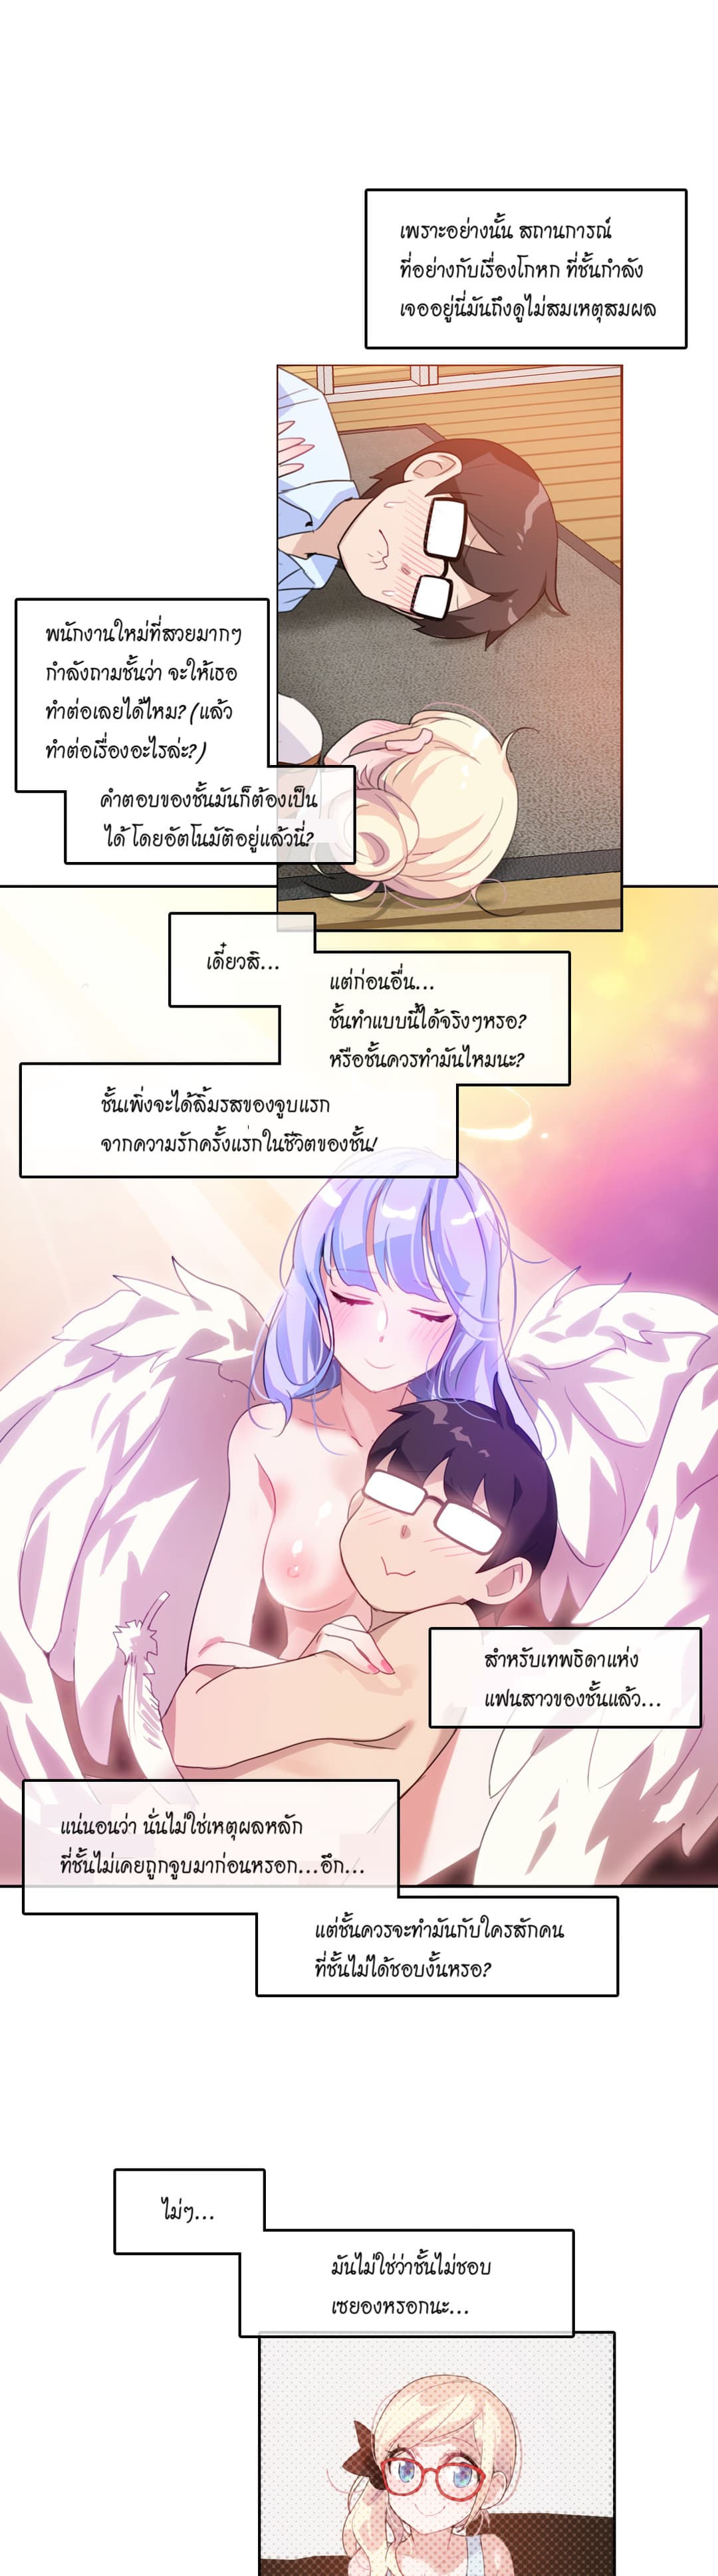 A Pervert’s Daily Life 10 (9)